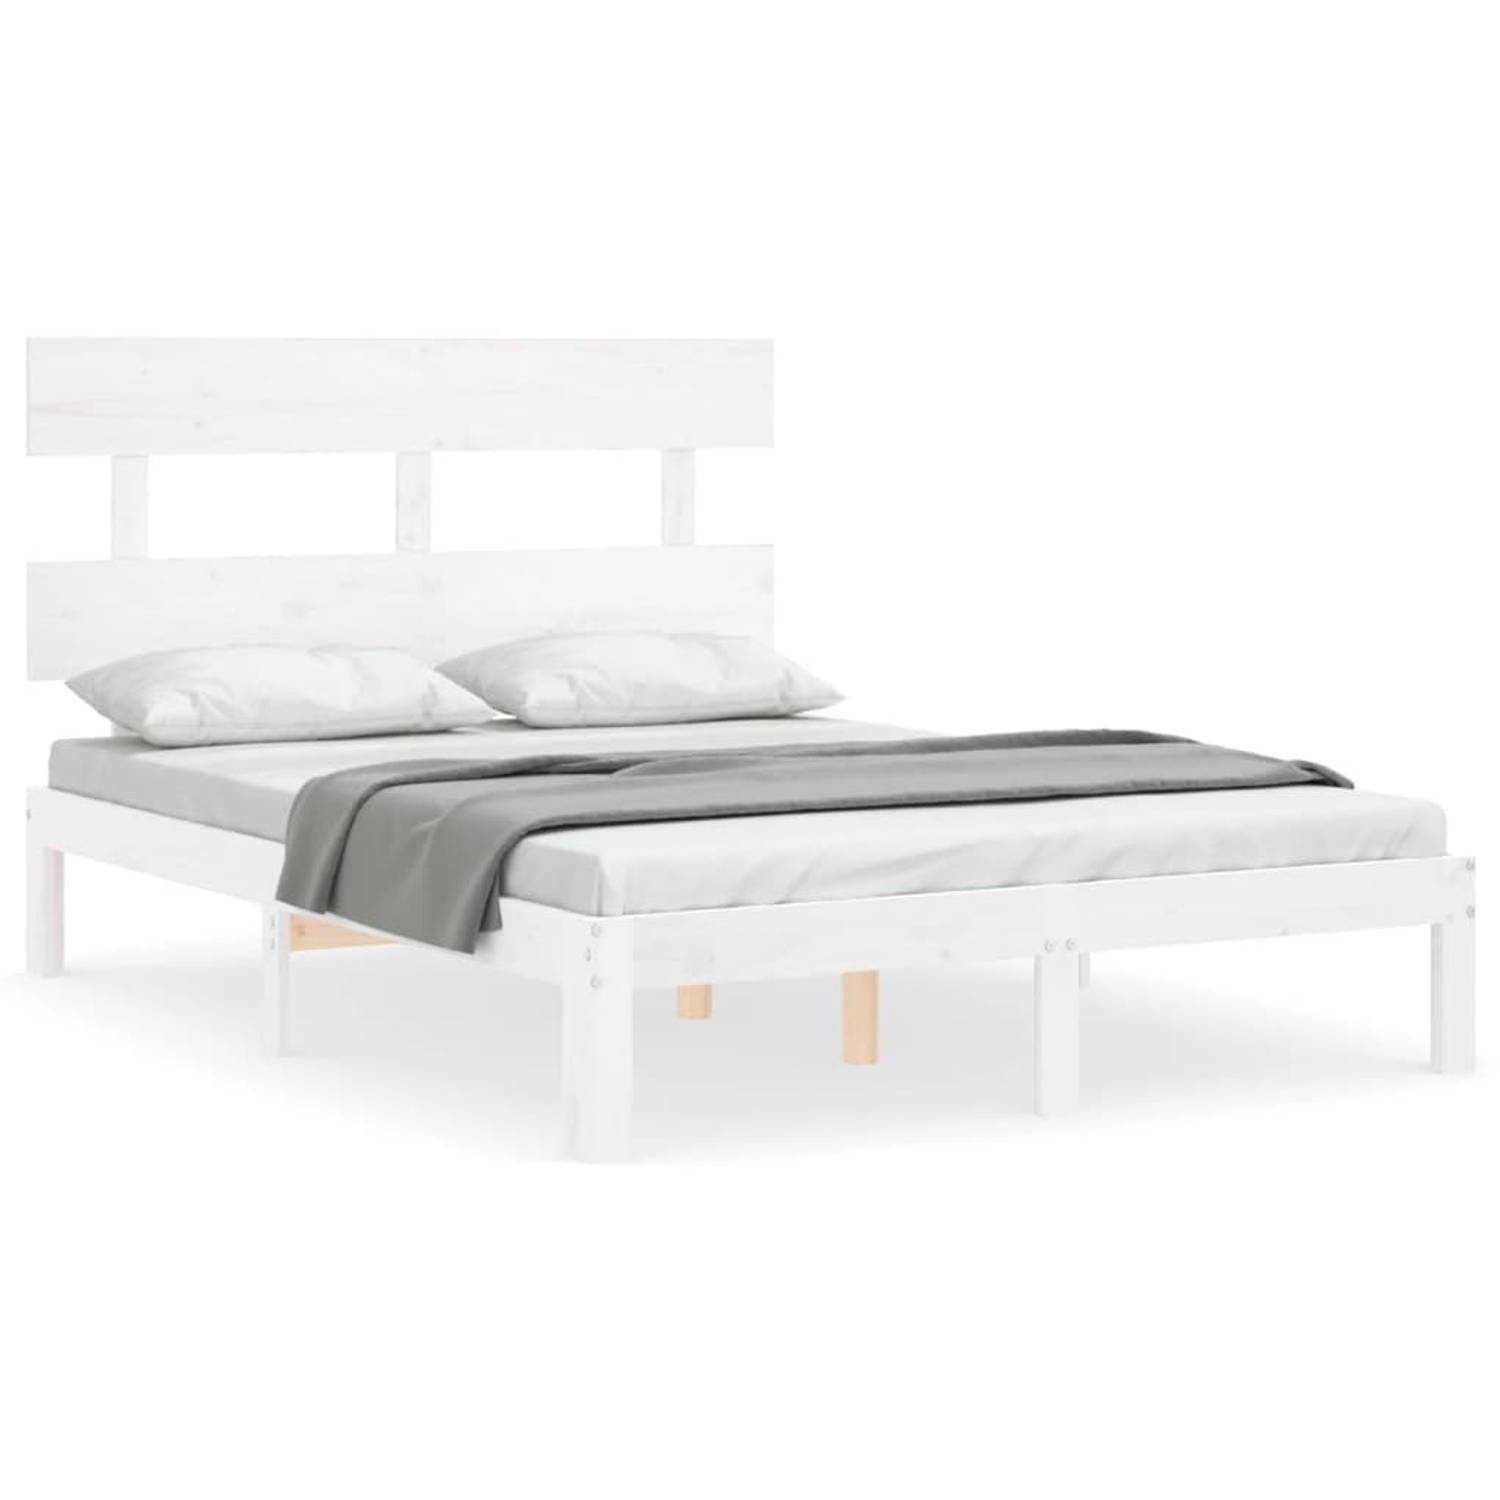 The Living Store Bed The Living Store Bedframe Grenenhout Wit 193.5 x 143.5 x 81 cm